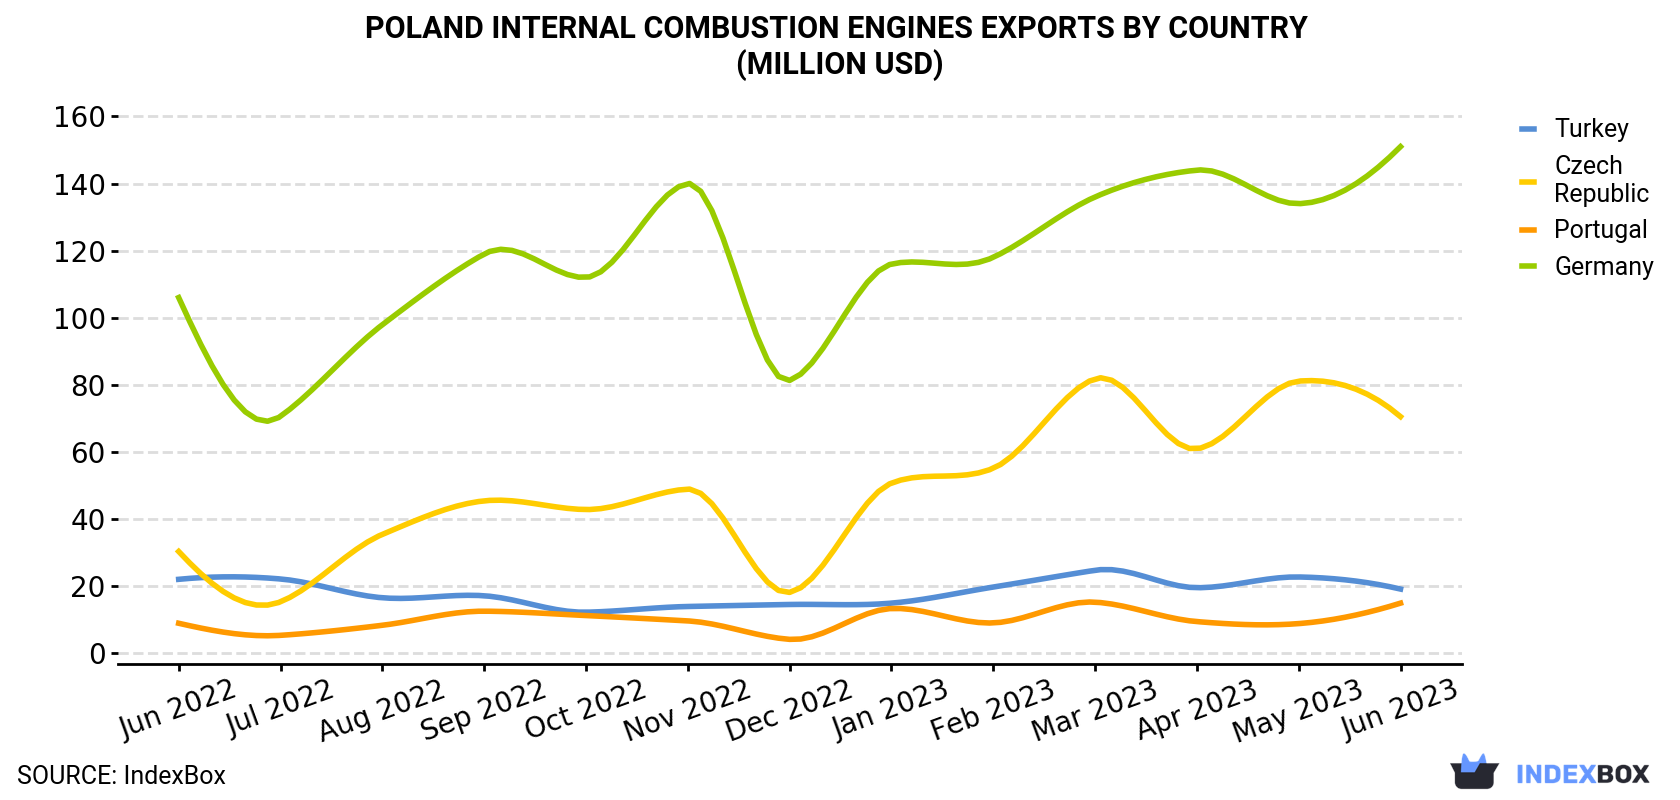 Poland Internal Combustion Engines Exports By Country (Million USD)